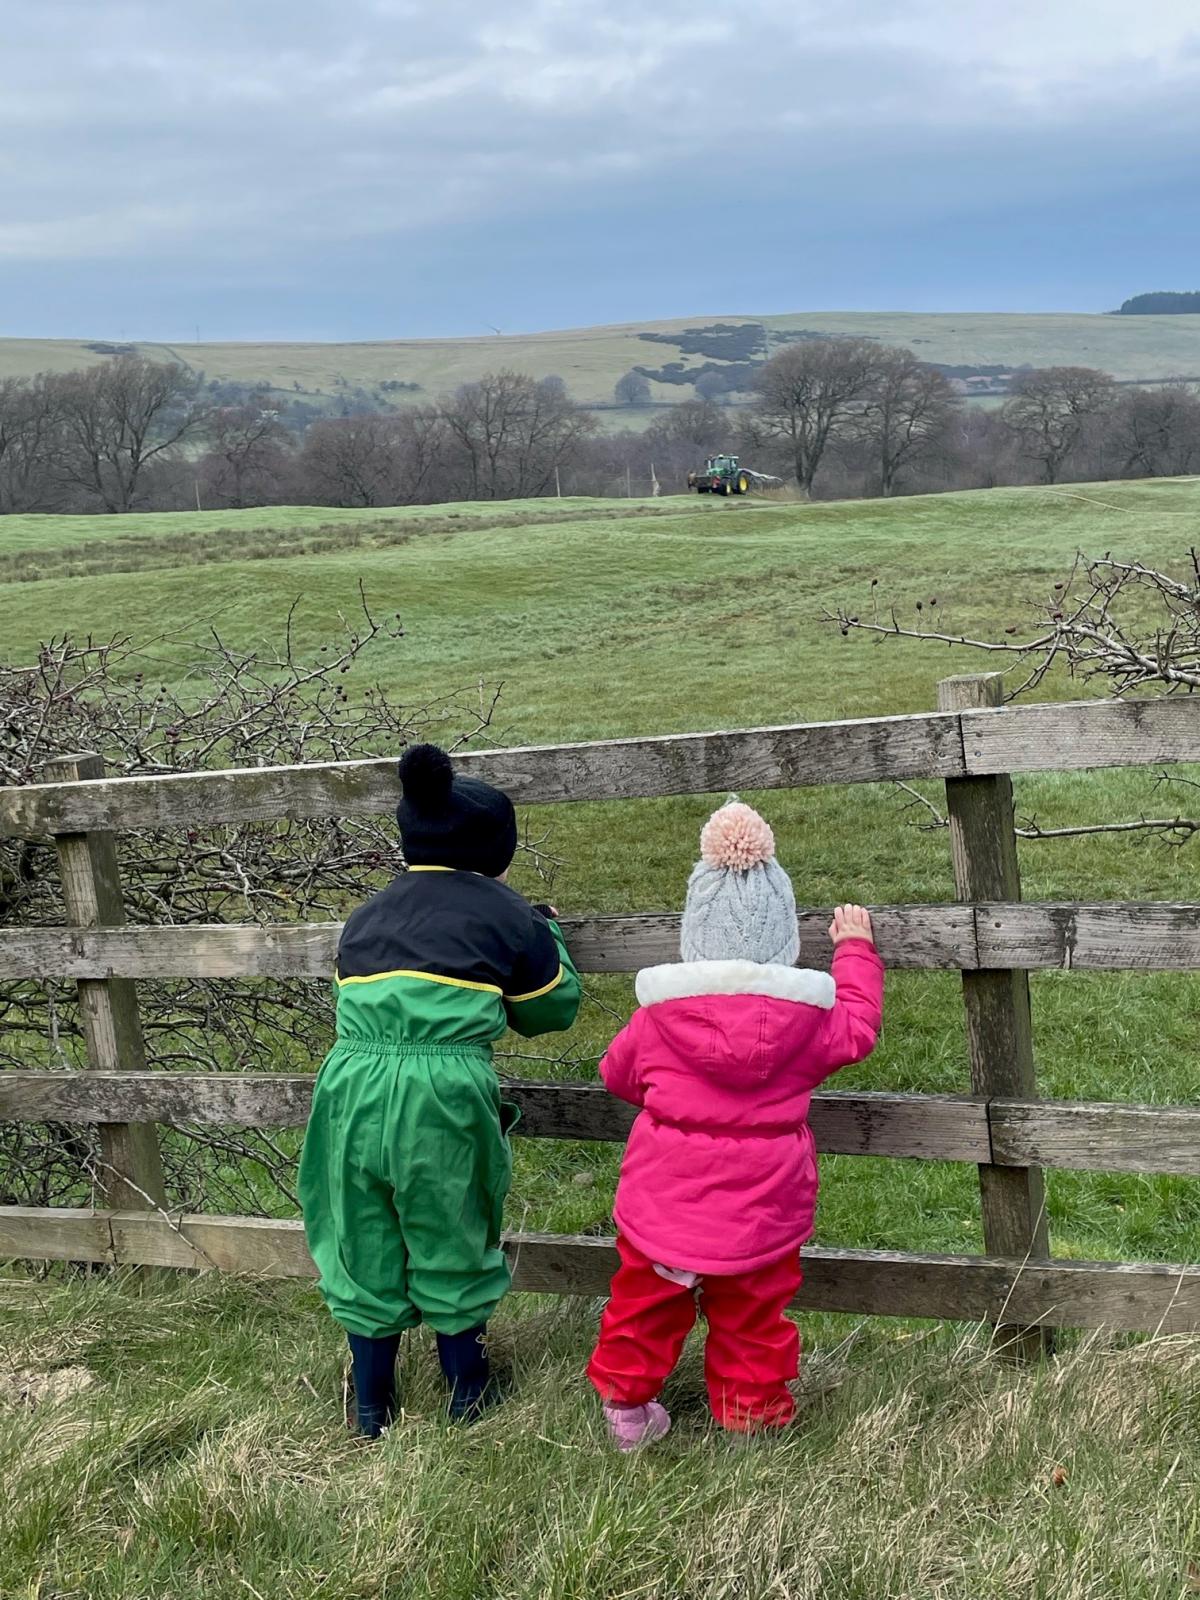 Harriet Dradge - Robbie & Isla Macleod keeping an eye on the slurry contractor for their dad